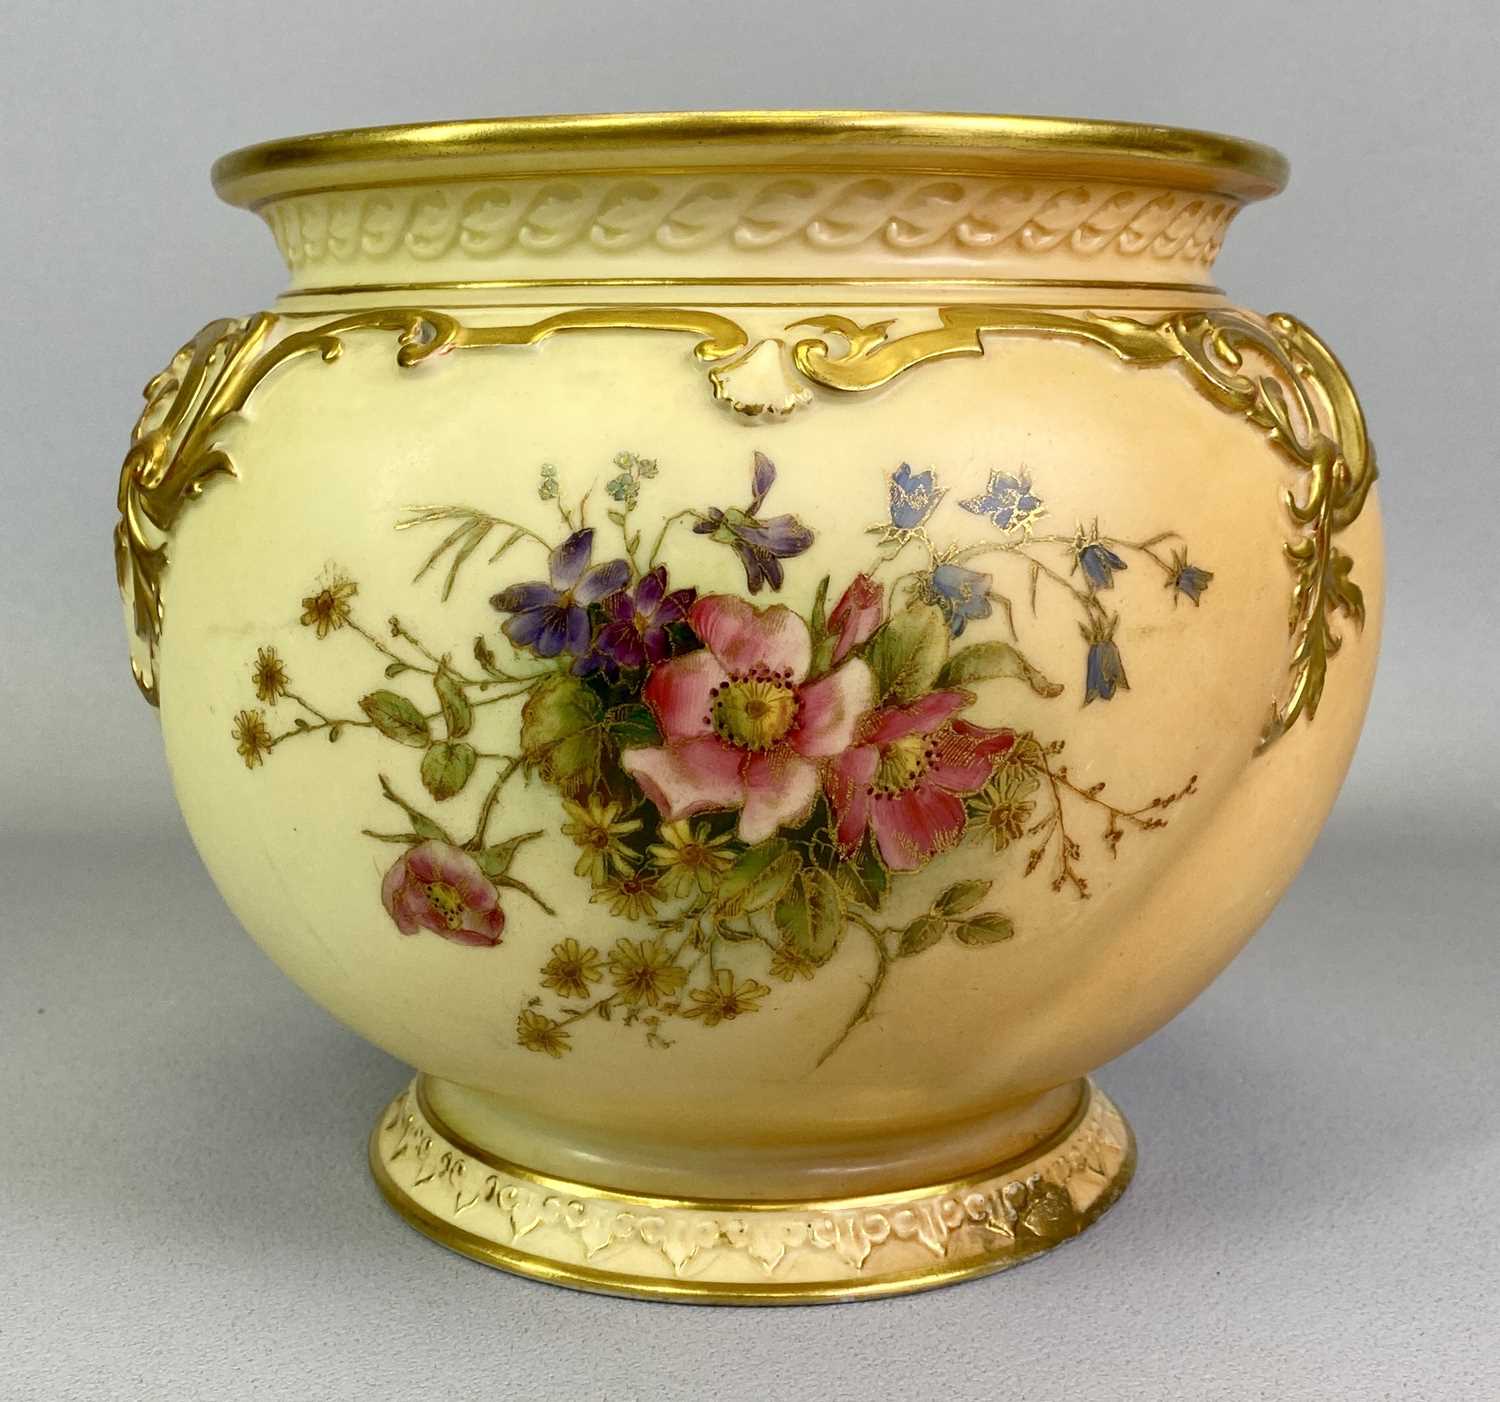 ROYAL WORCESTER 'BLUSH IVORY' JARDINIERE - hand painted with floral sprays and with gilt highlighted